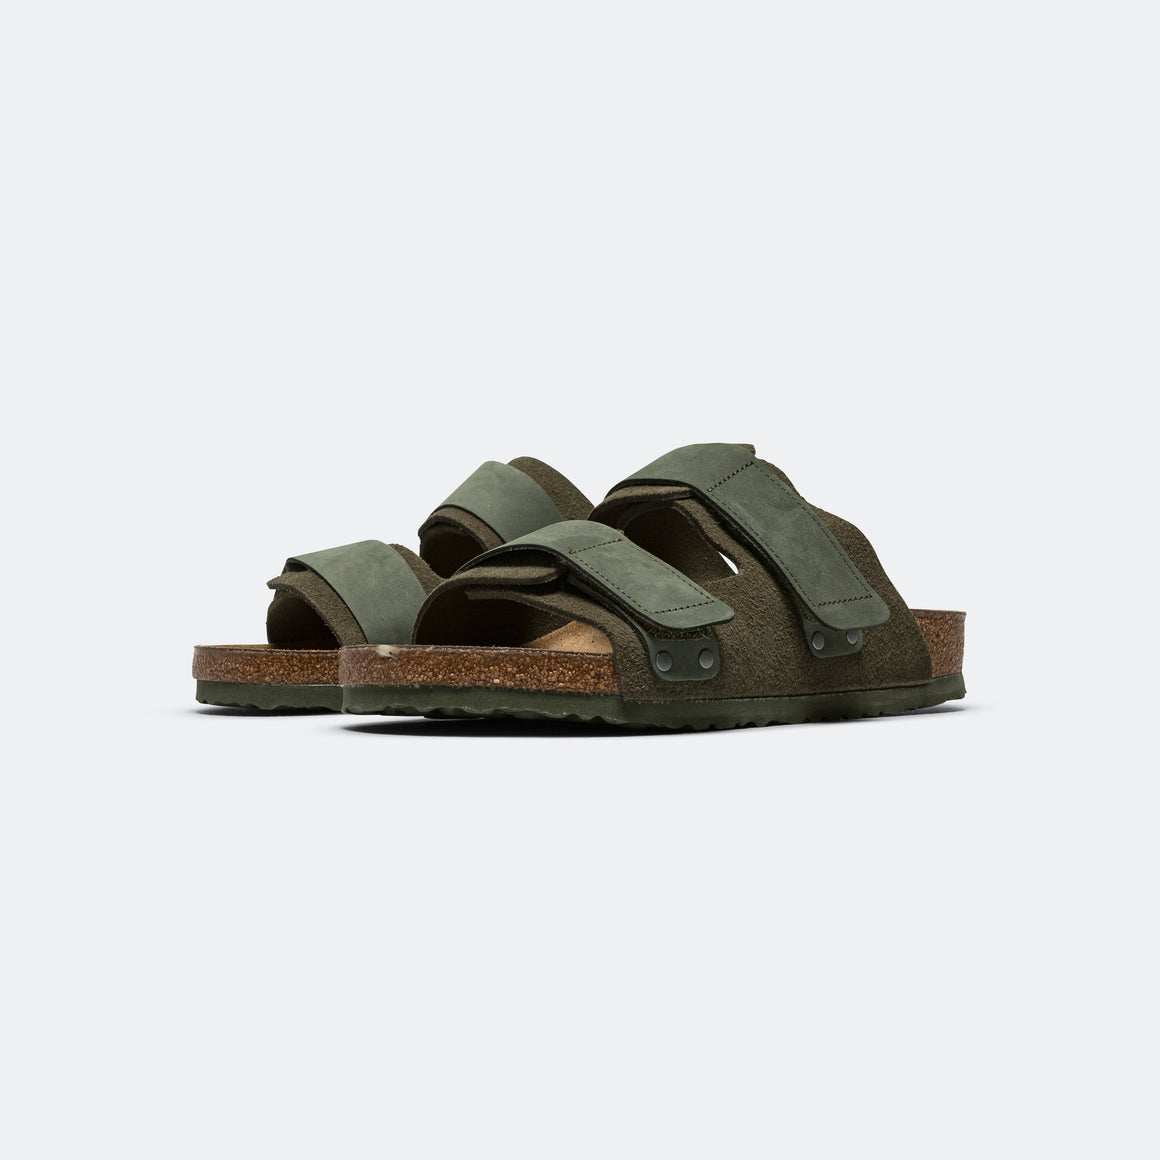 Birkenstock - Uji - Thyme Suede Leather - UP THERE